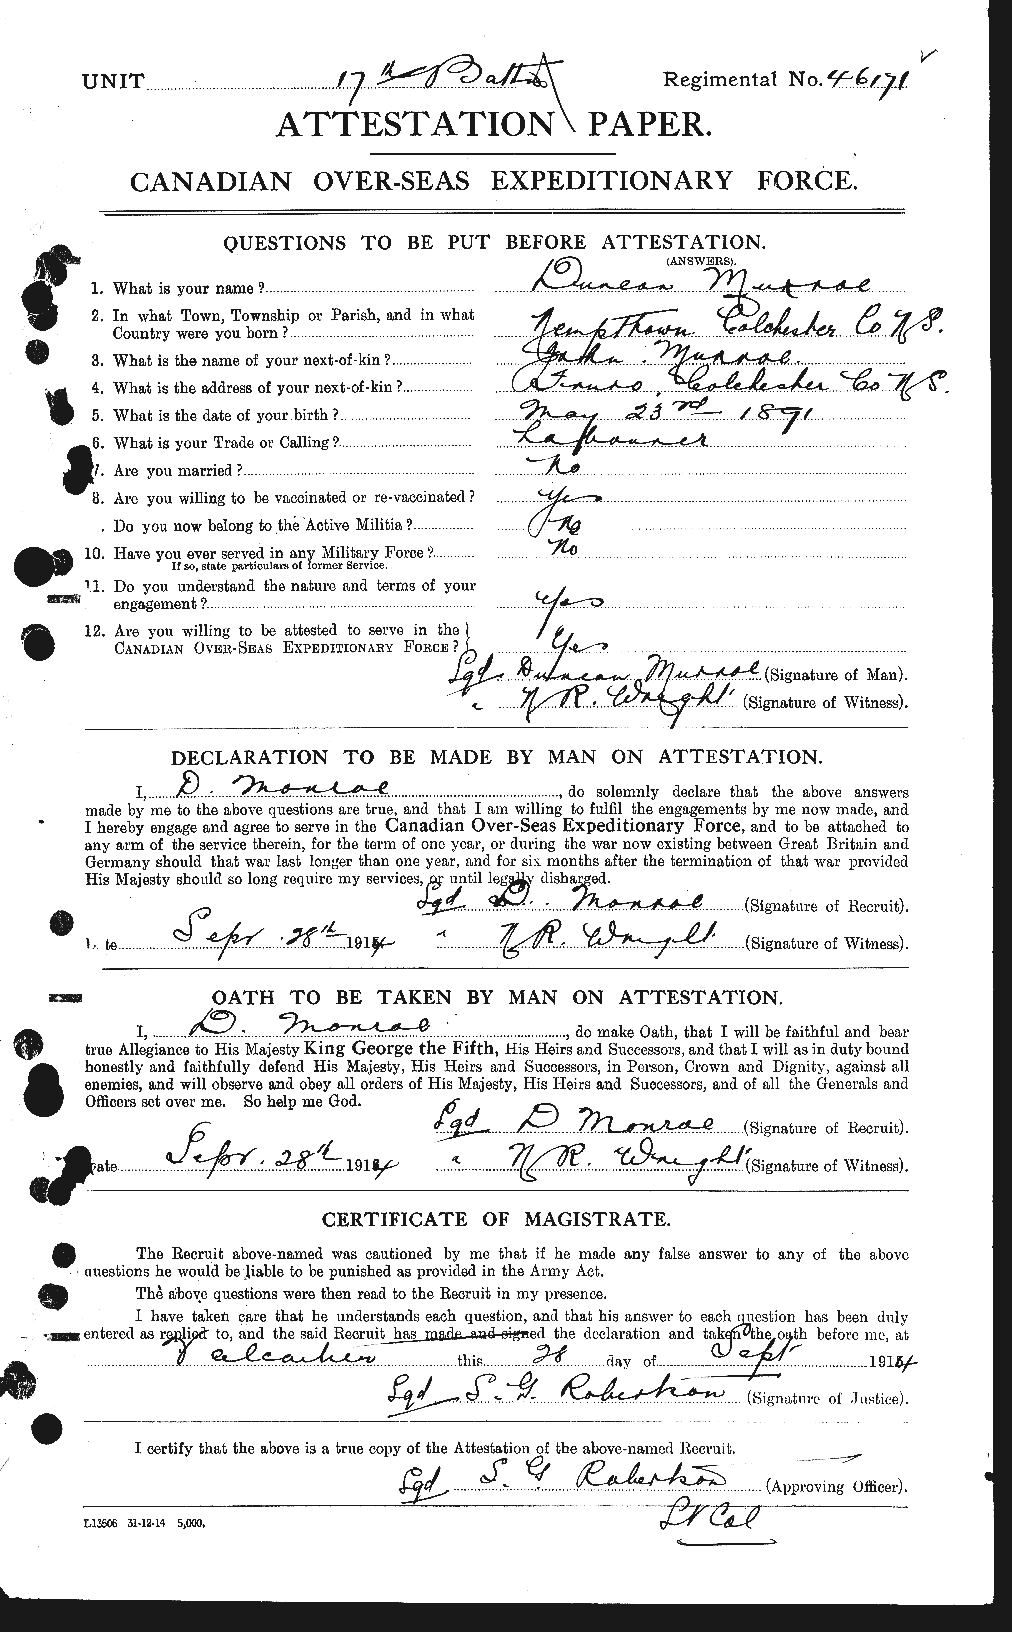 Personnel Records of the First World War - CEF 515490a